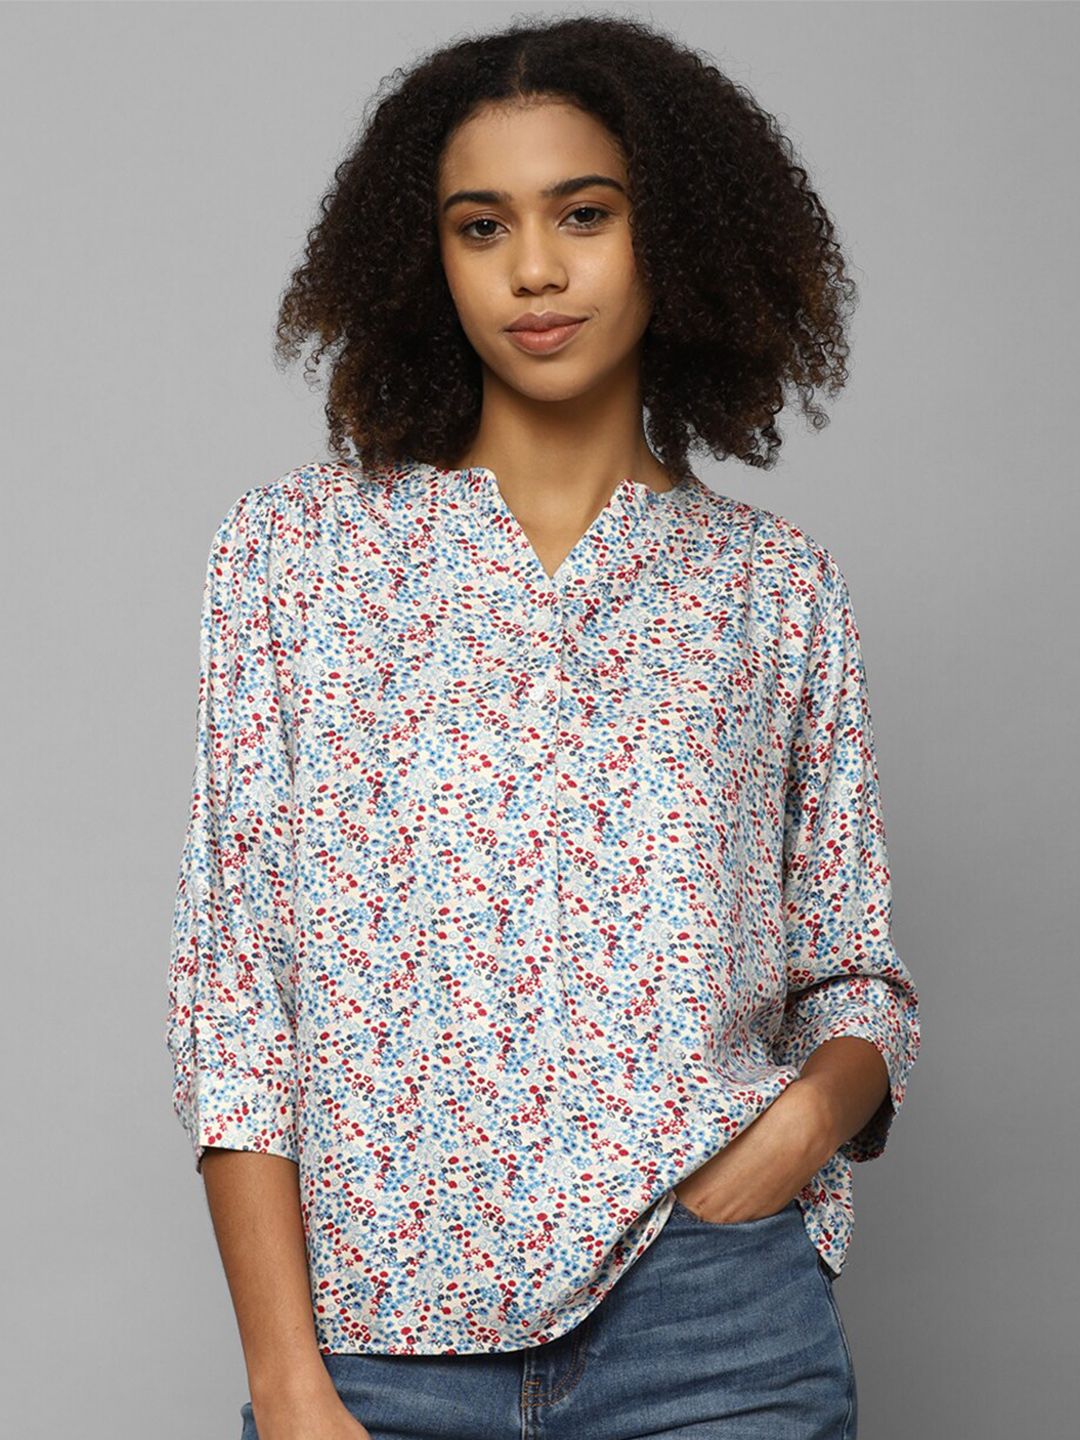 Allen Solly Woman Floral Printed Mandarin Collar Shirt Style Top Price in India